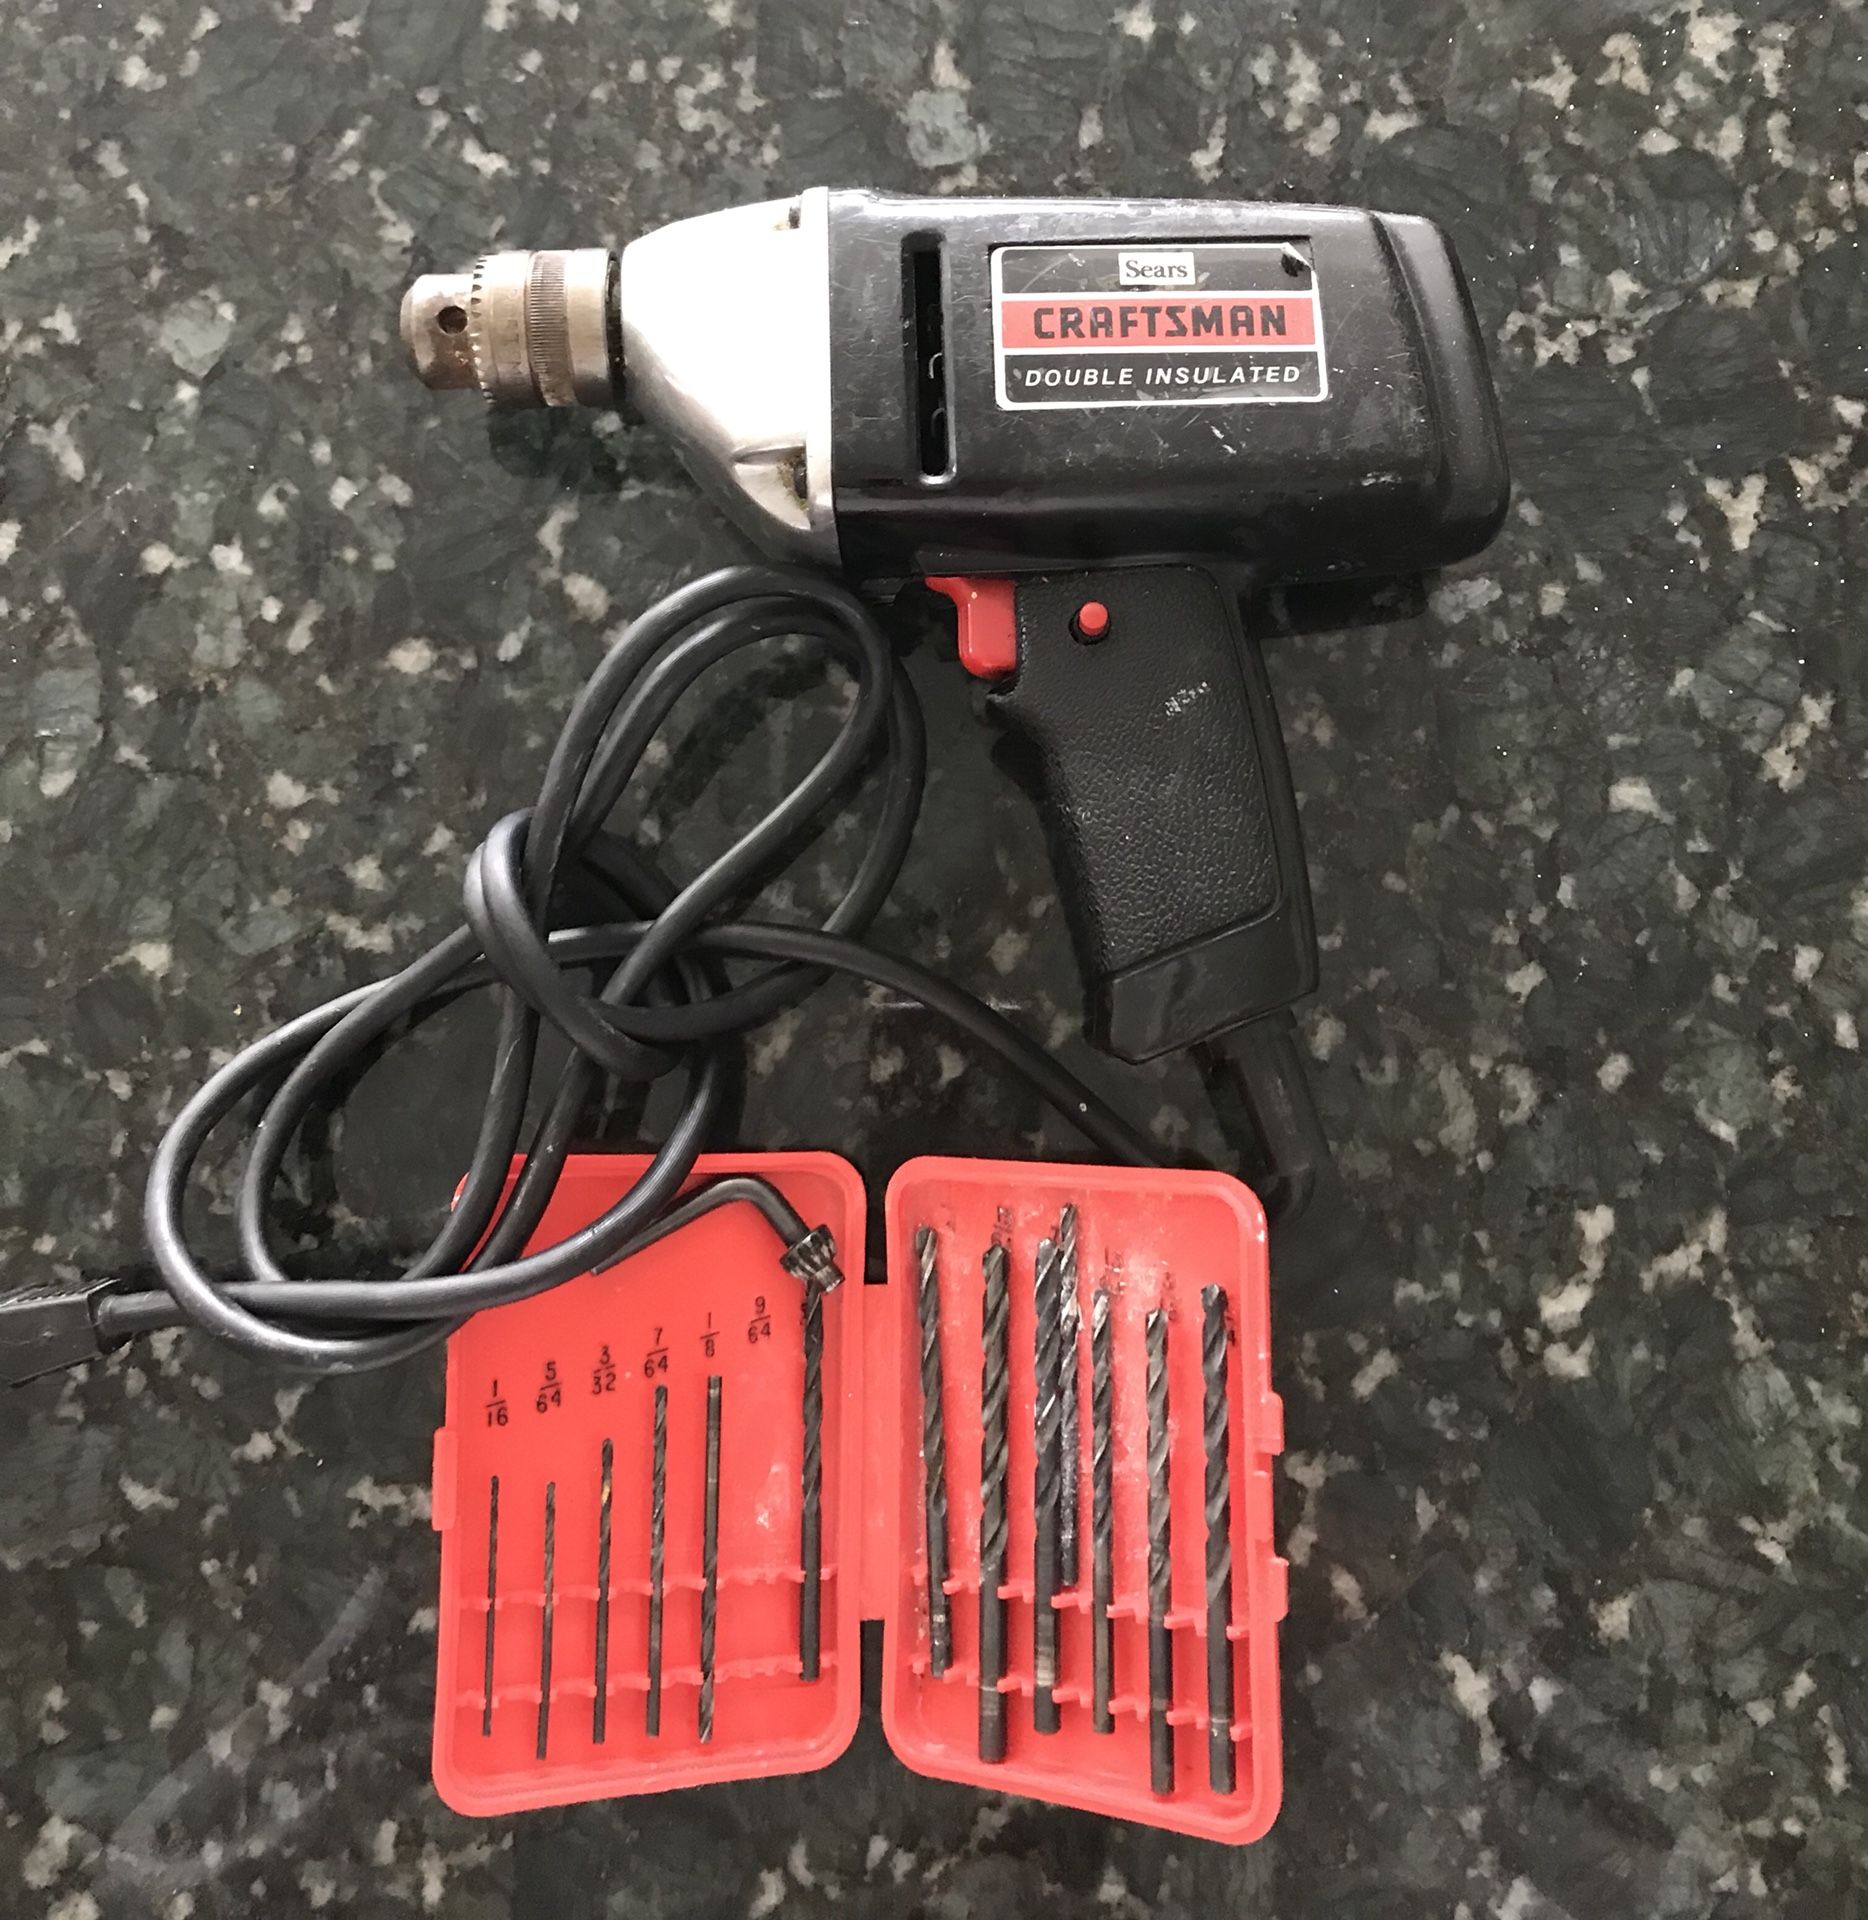 Craftsman Double Insulated Drill